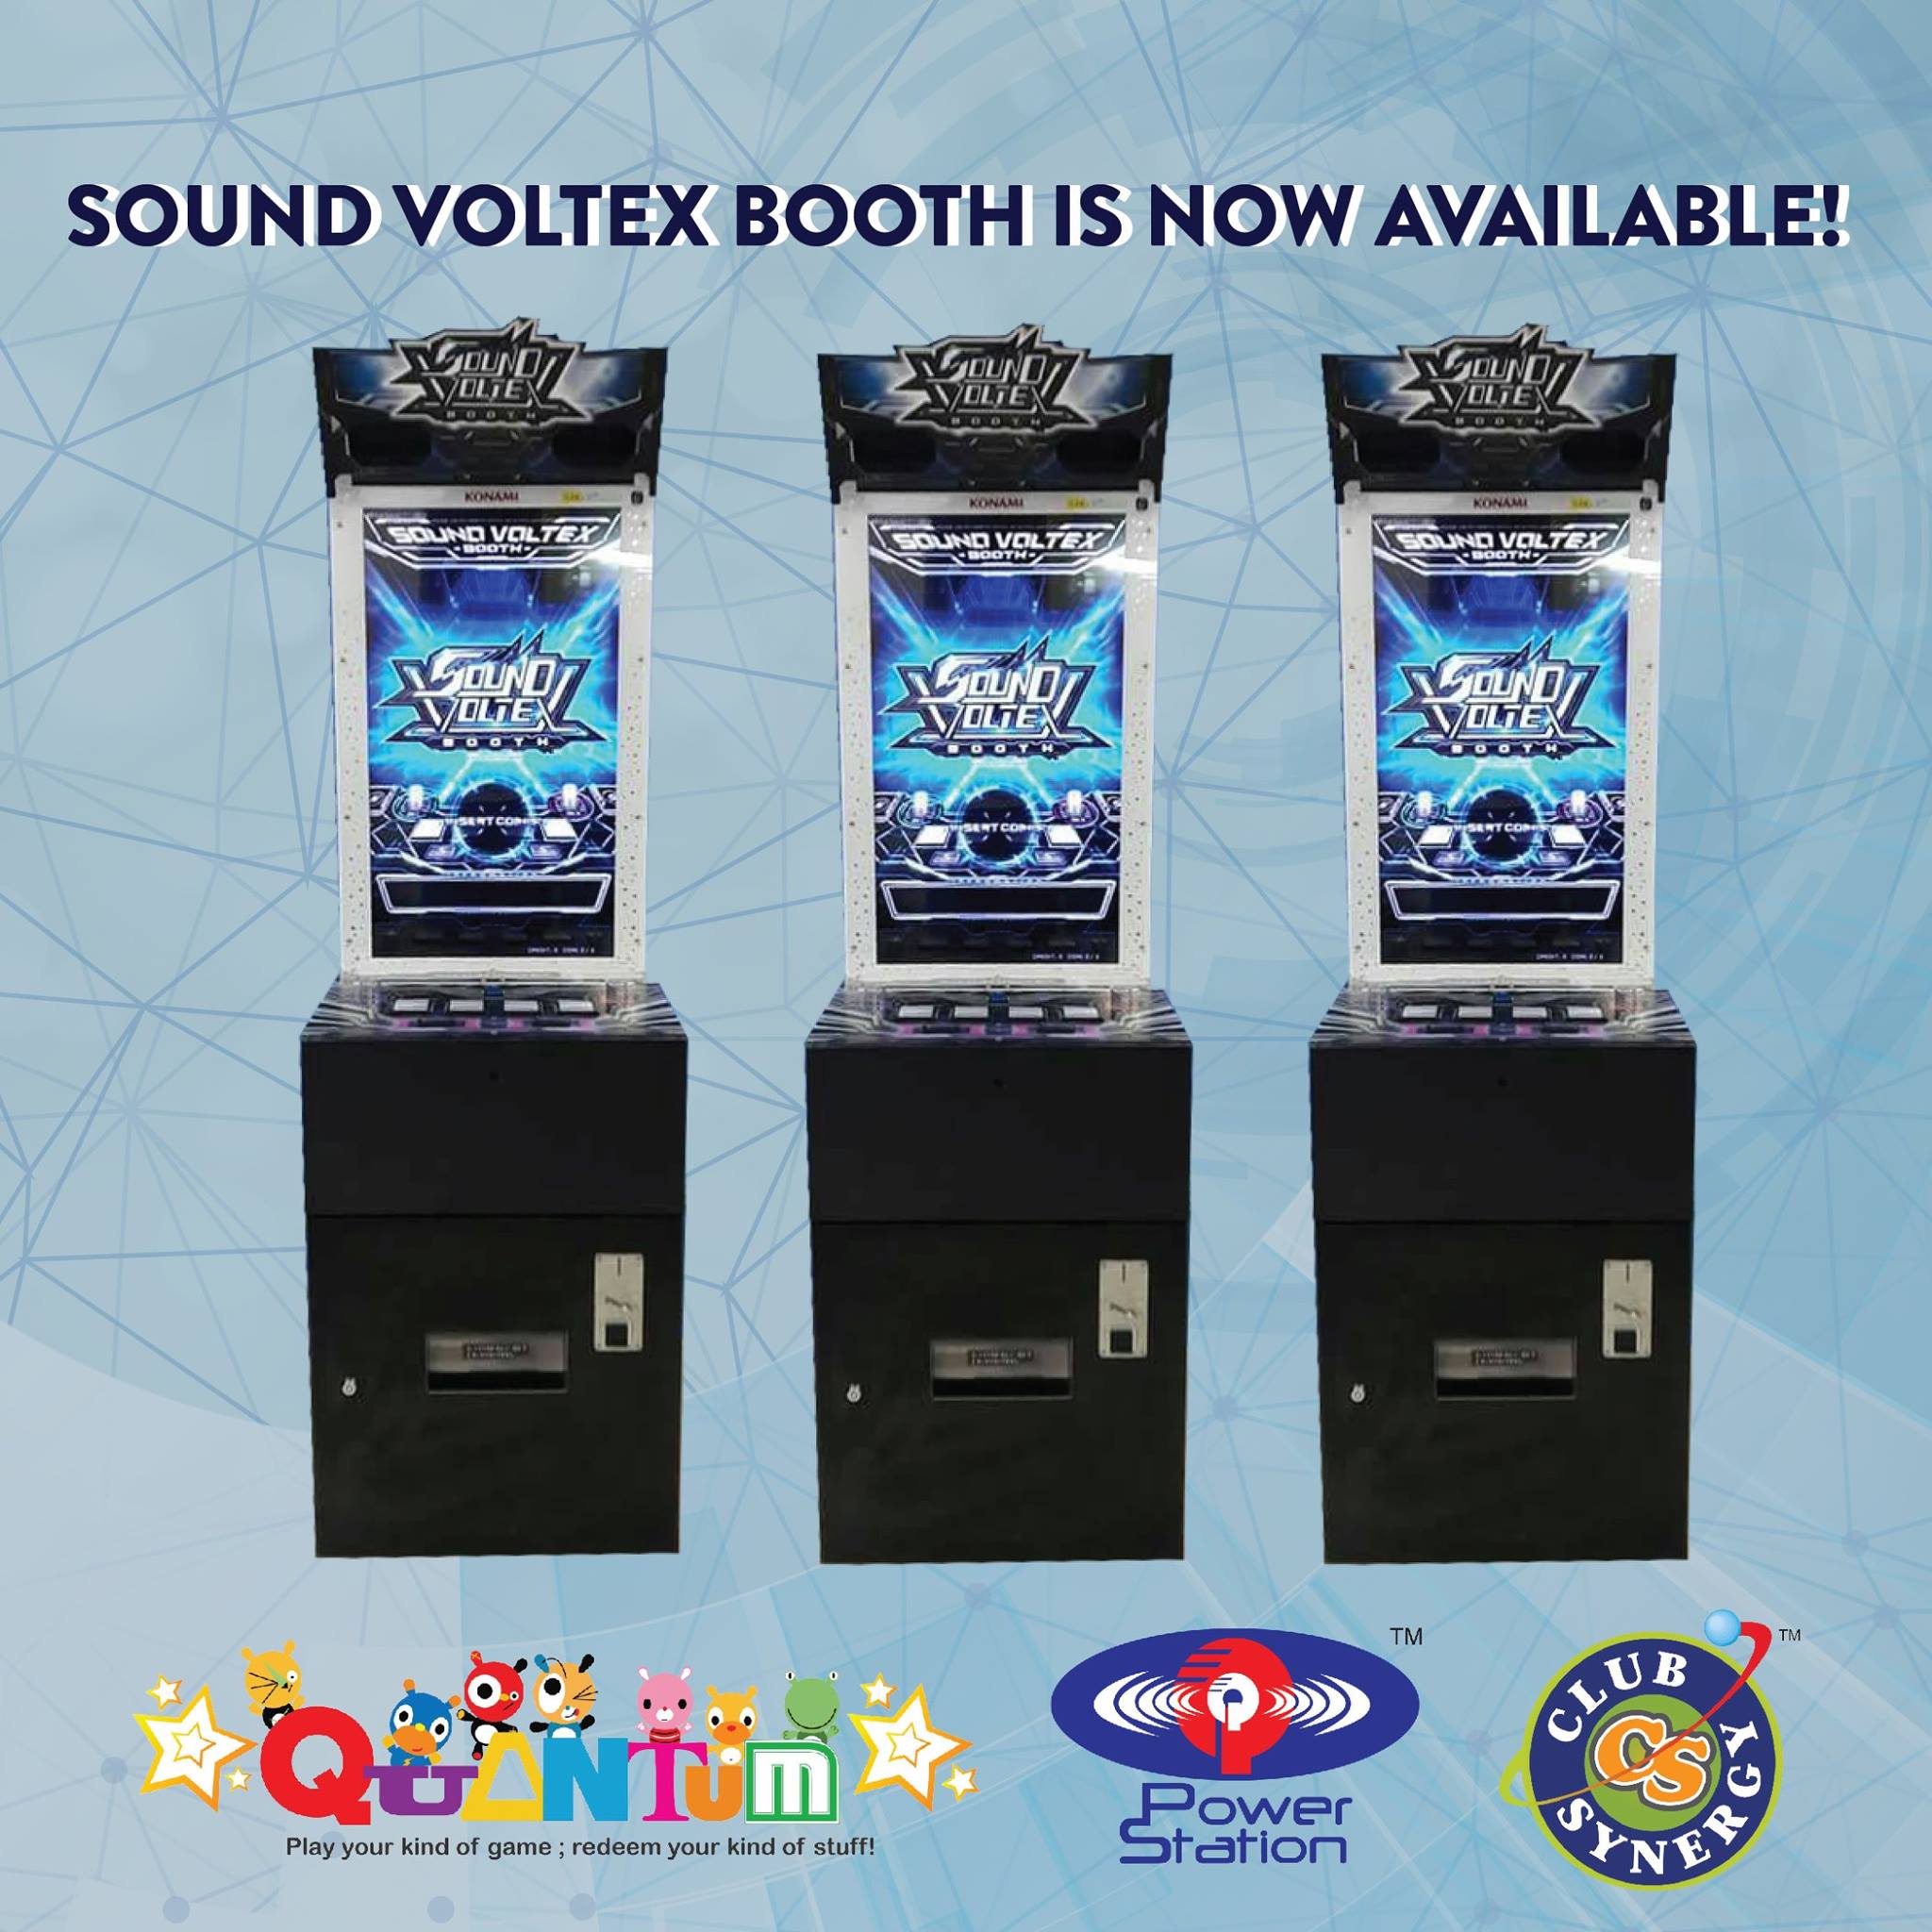 Sound Voltex Booth Images - LaunchBox Games Database